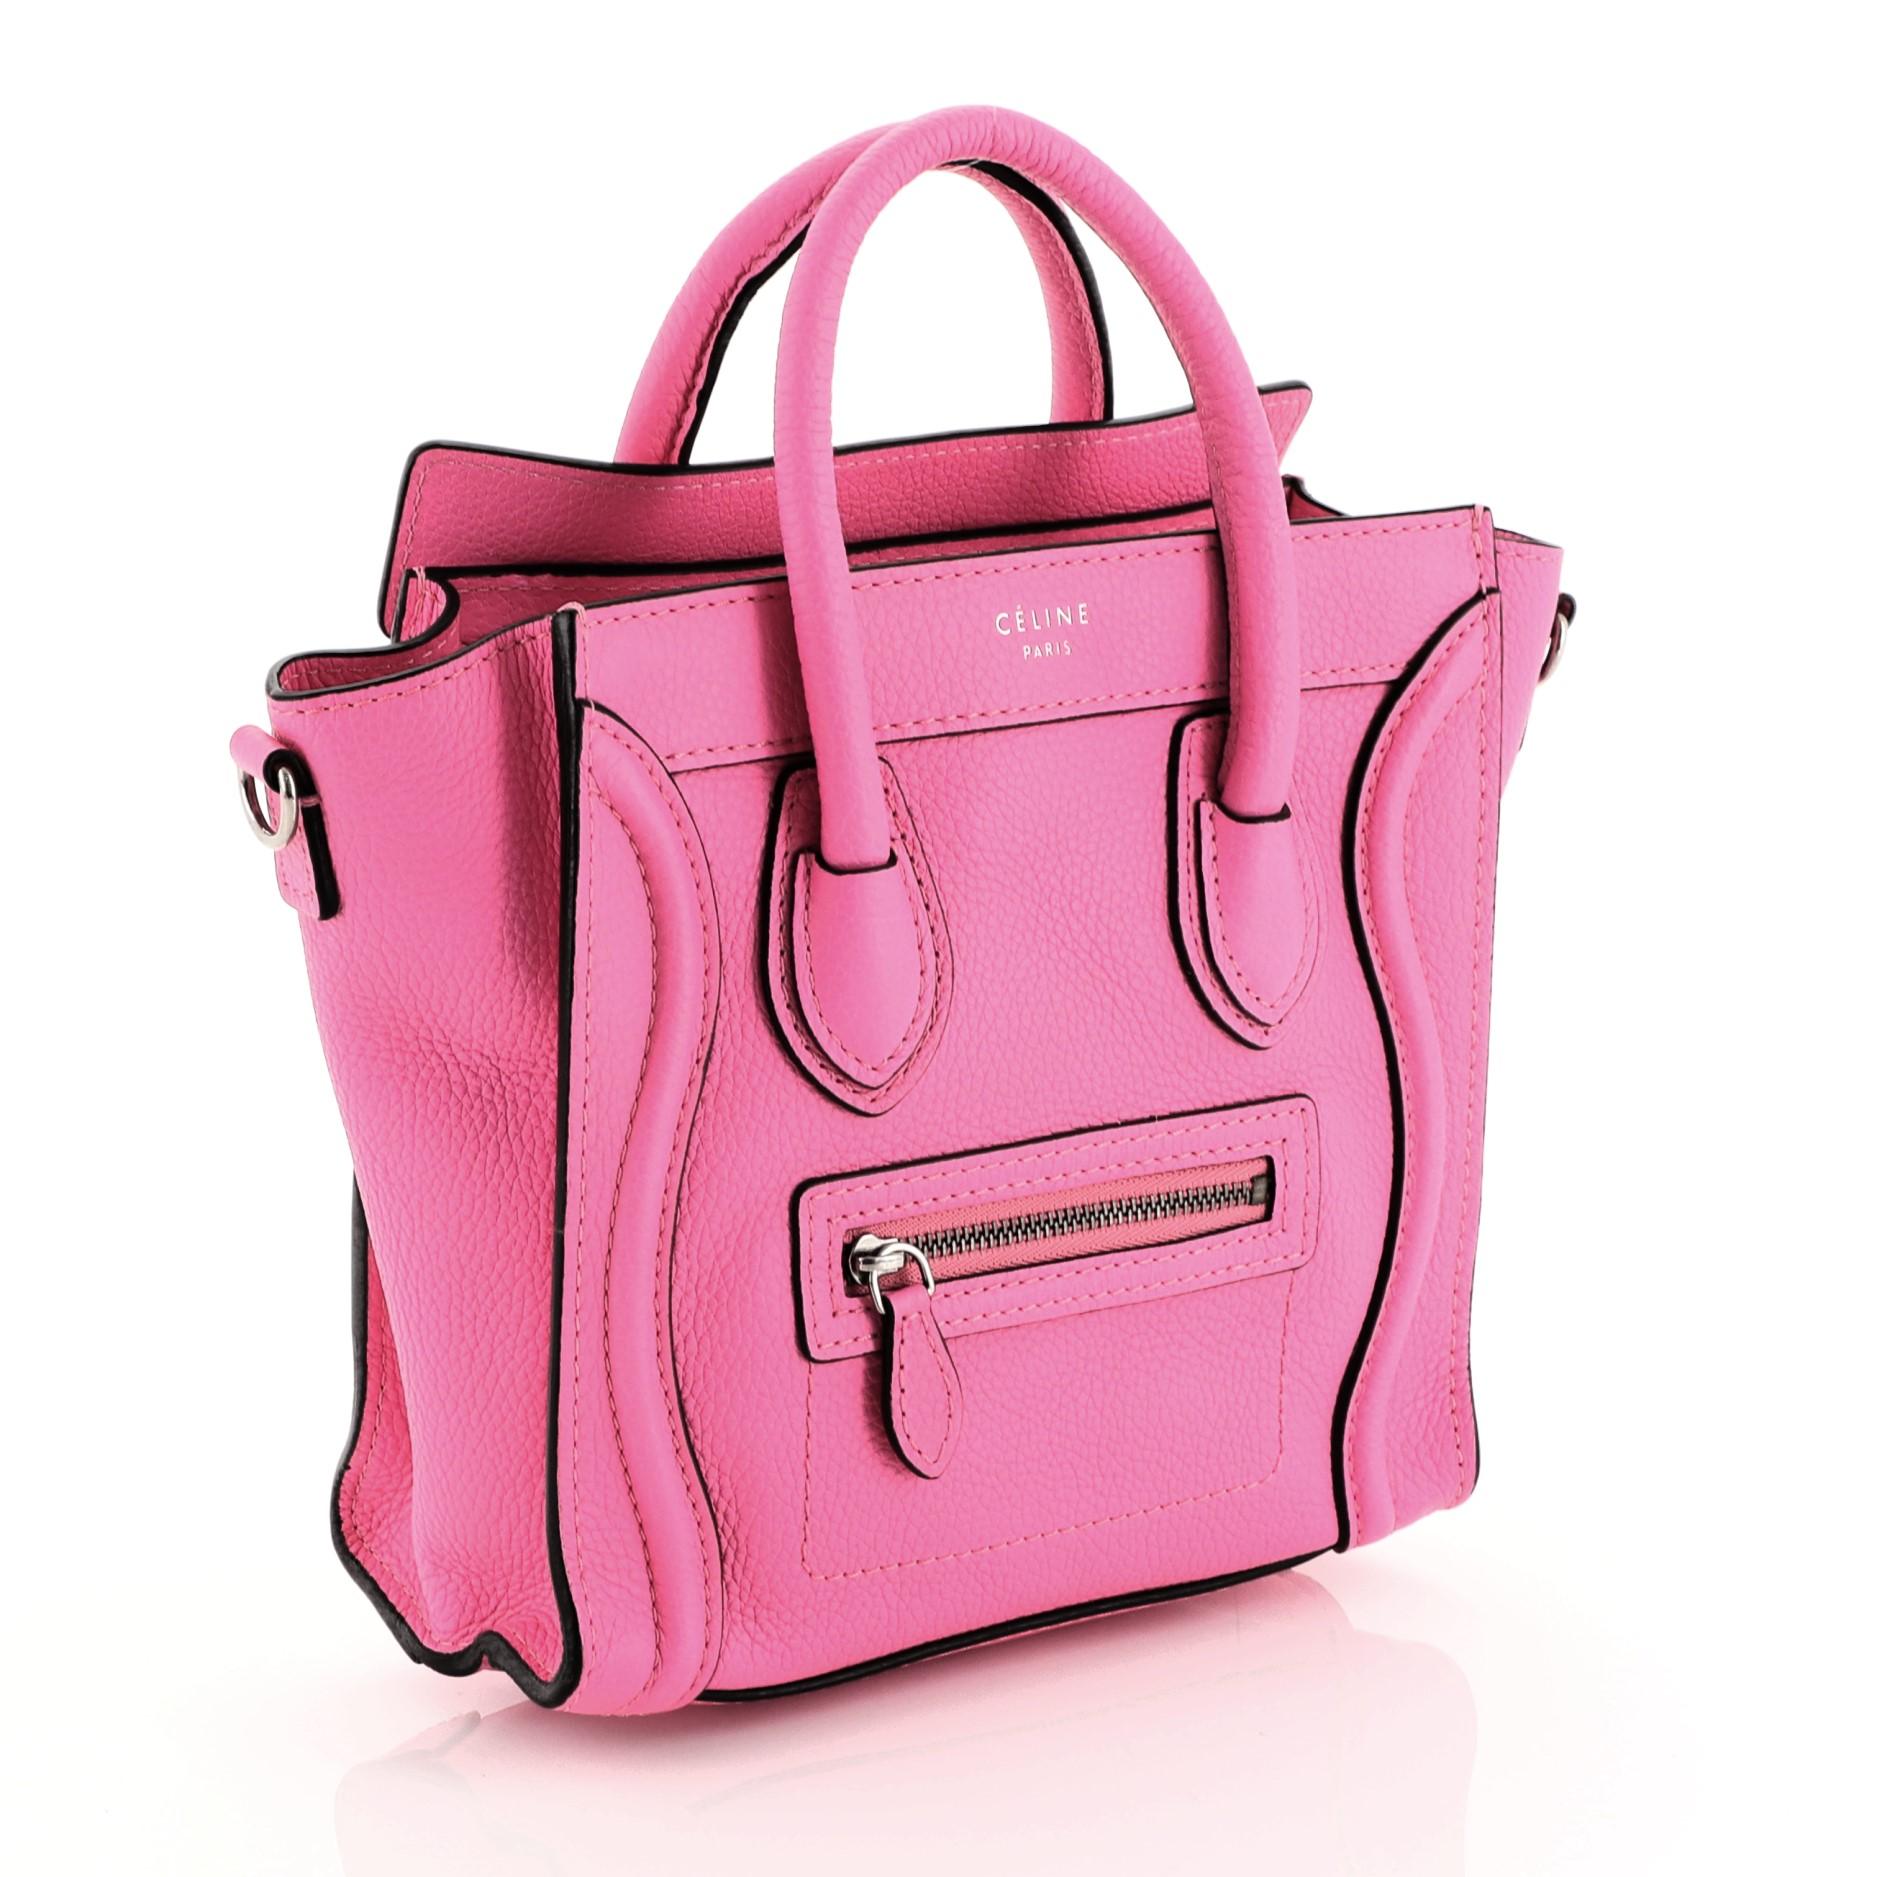 This Celine Luggage Handbag Grainy Leather Nano, crafted in pink grainy leather, features dual rolled leather handles, front zip pocket, and silver-tone hardware. Its zip closure opens to a pink microfiber interior with zip and slip